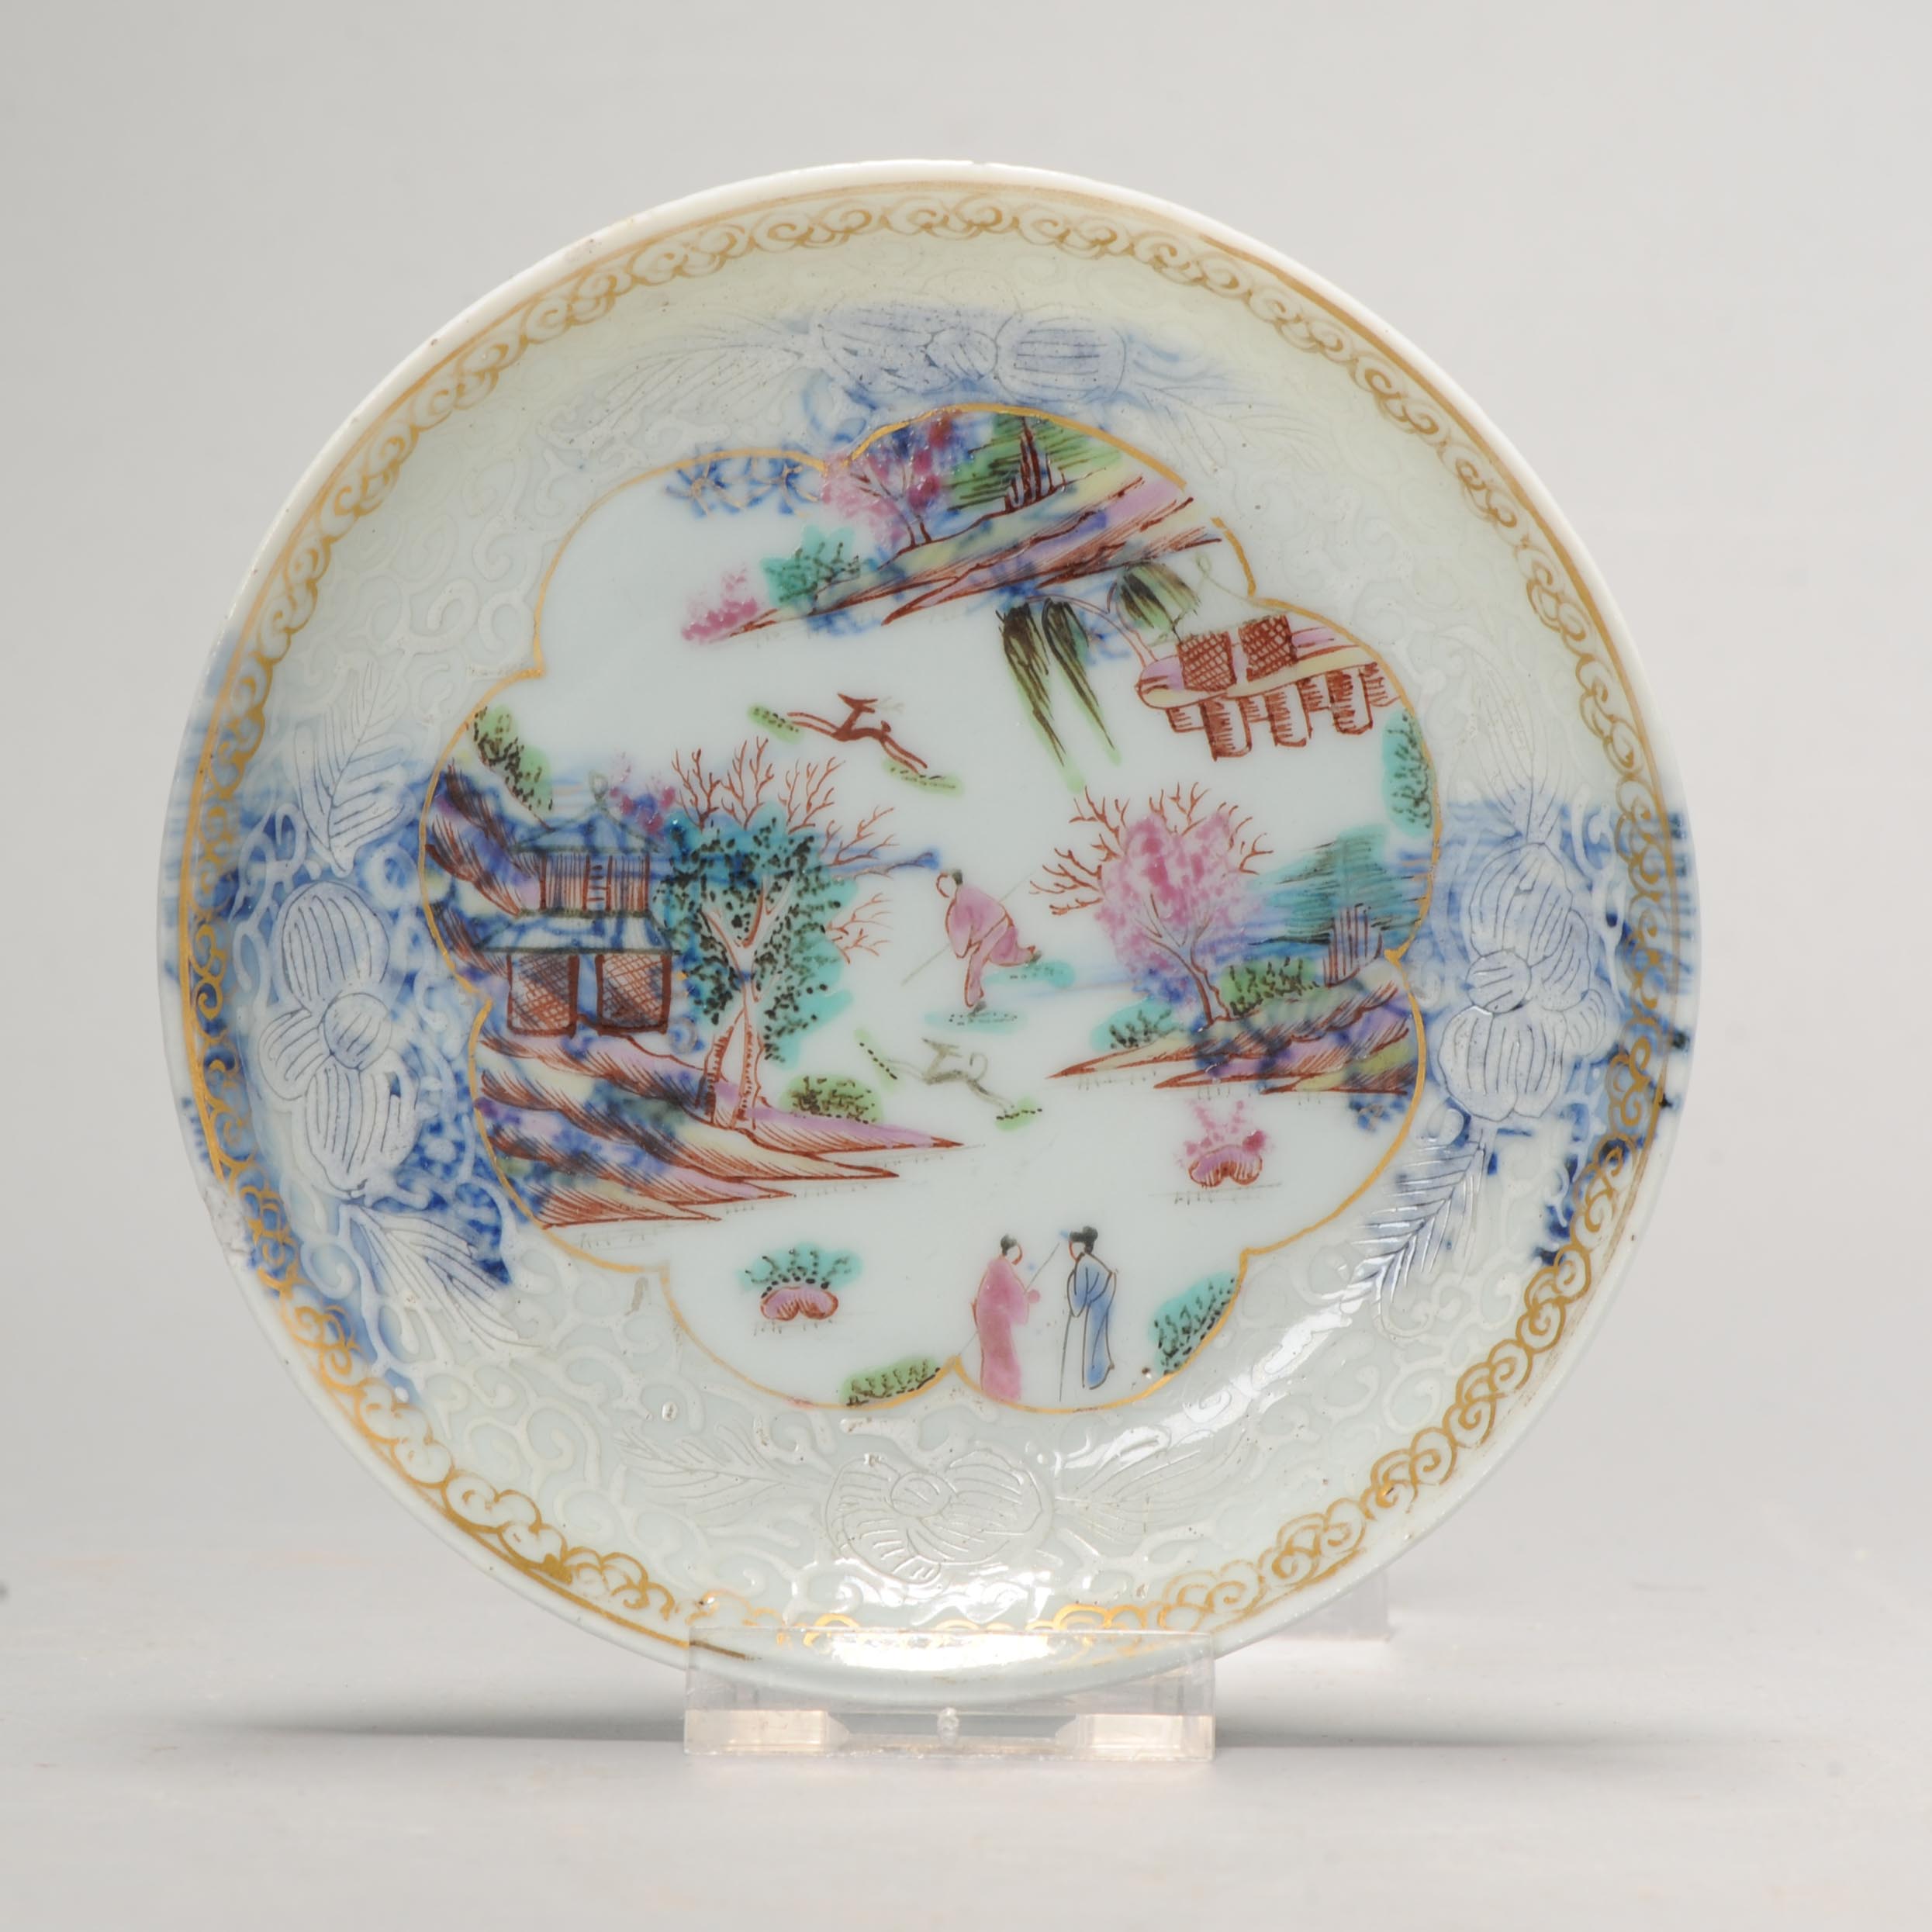 1098 A Lovely Saucer Dish. Painted in Europe on a Chinese blue and white. London Bont